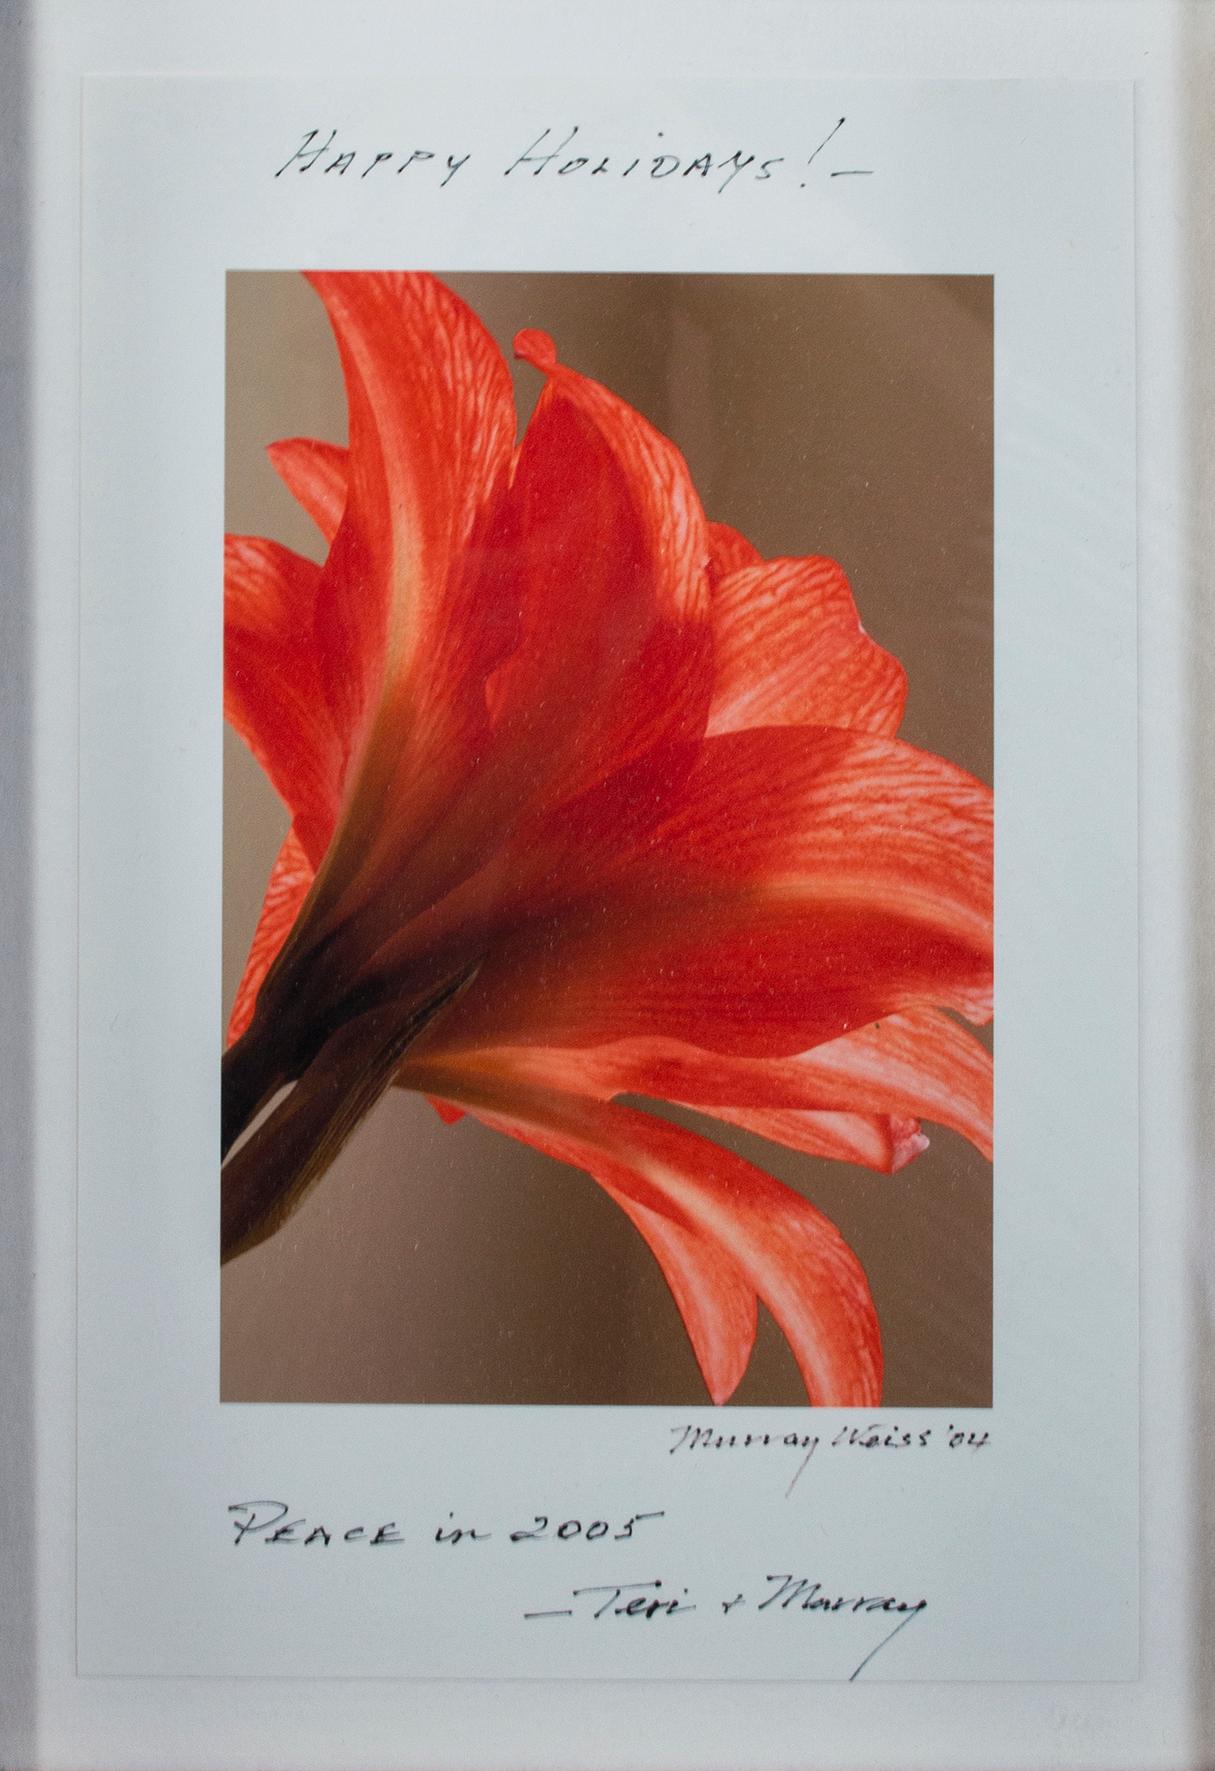 "Red Orange Flower, inscribed 'Happy Holidays!' - Peace in 2005 - Teri & Murray"